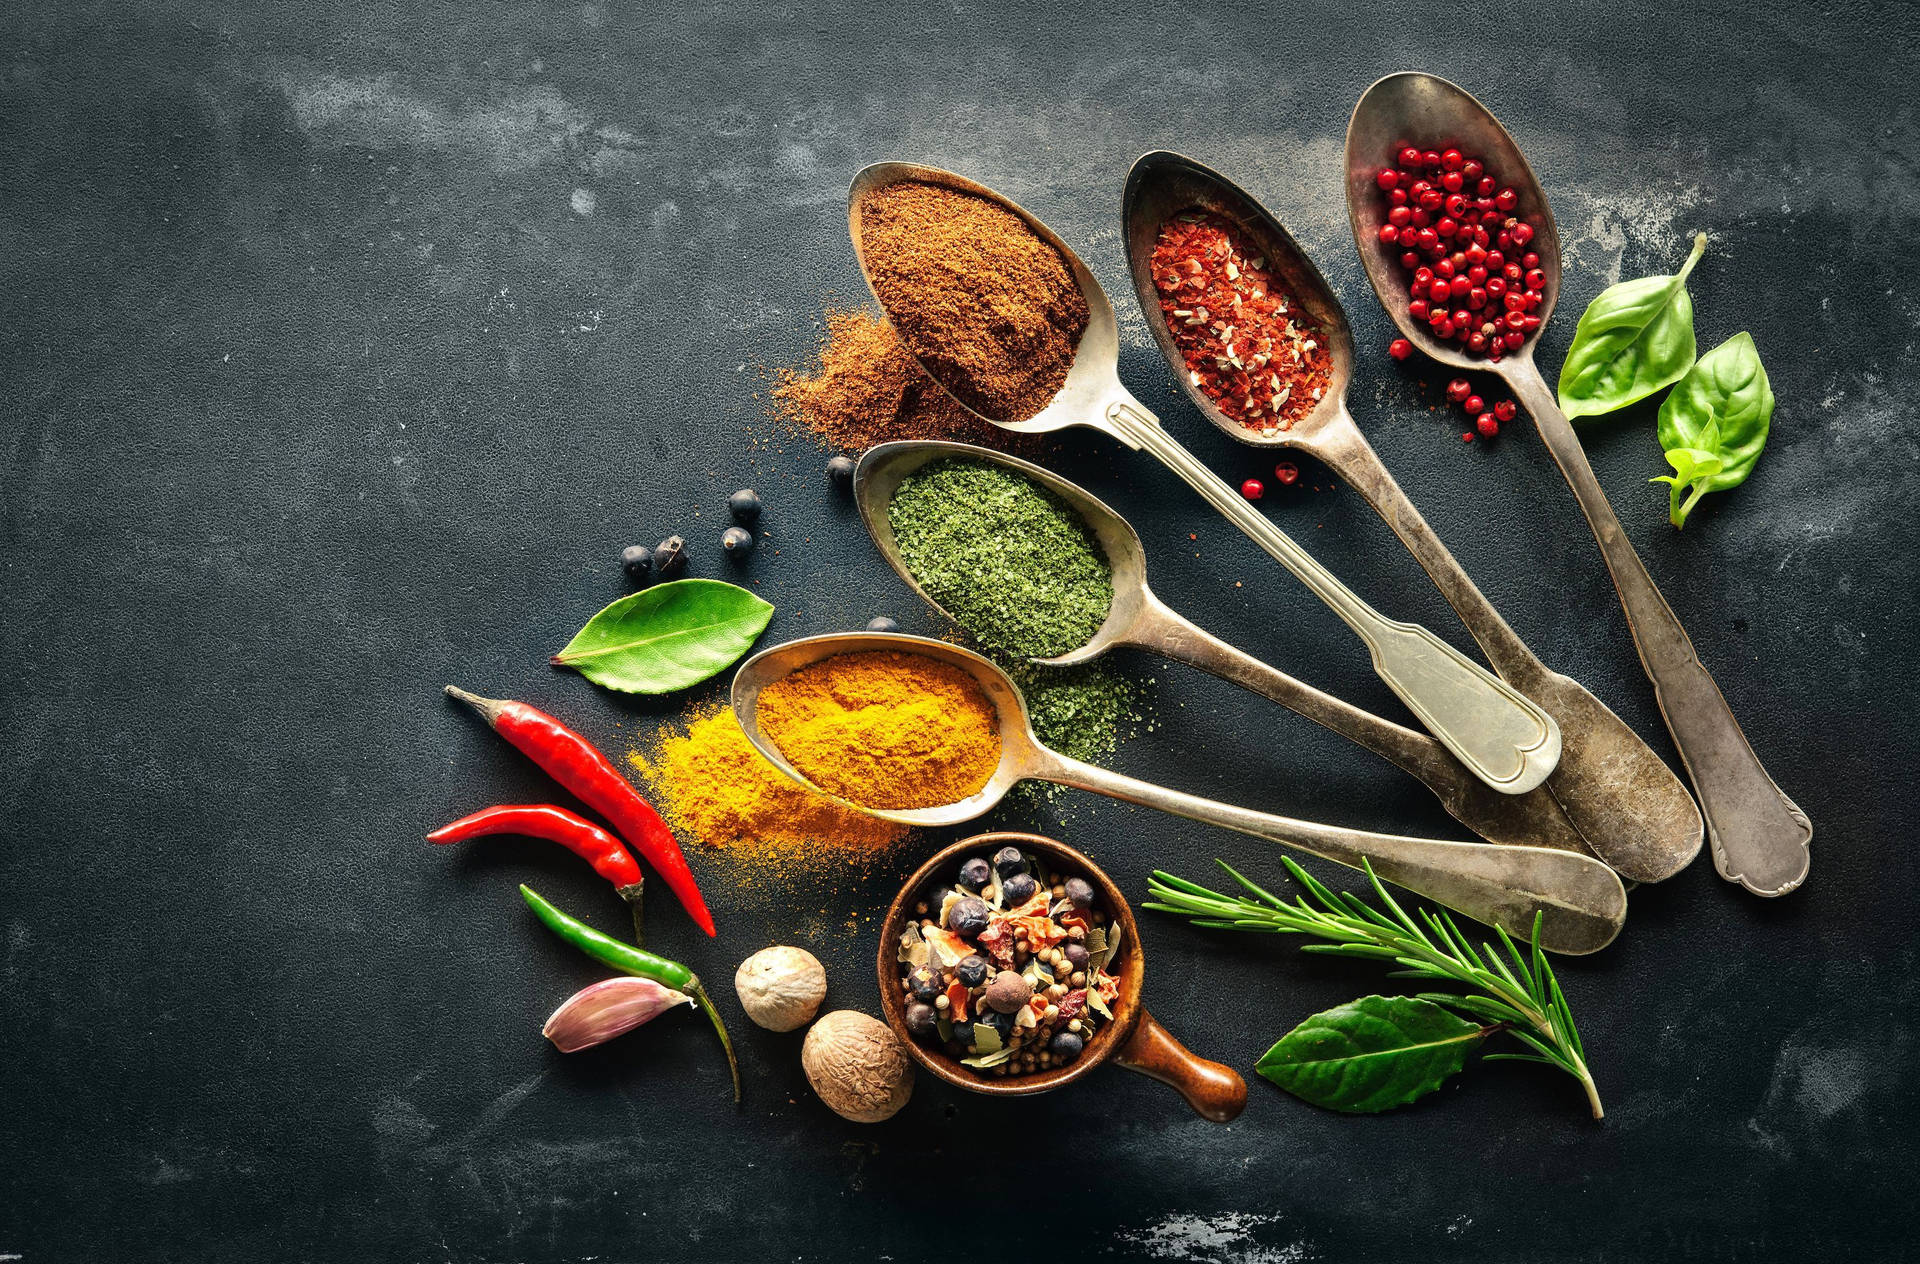 Spoonful of spices cooking wallpaper.